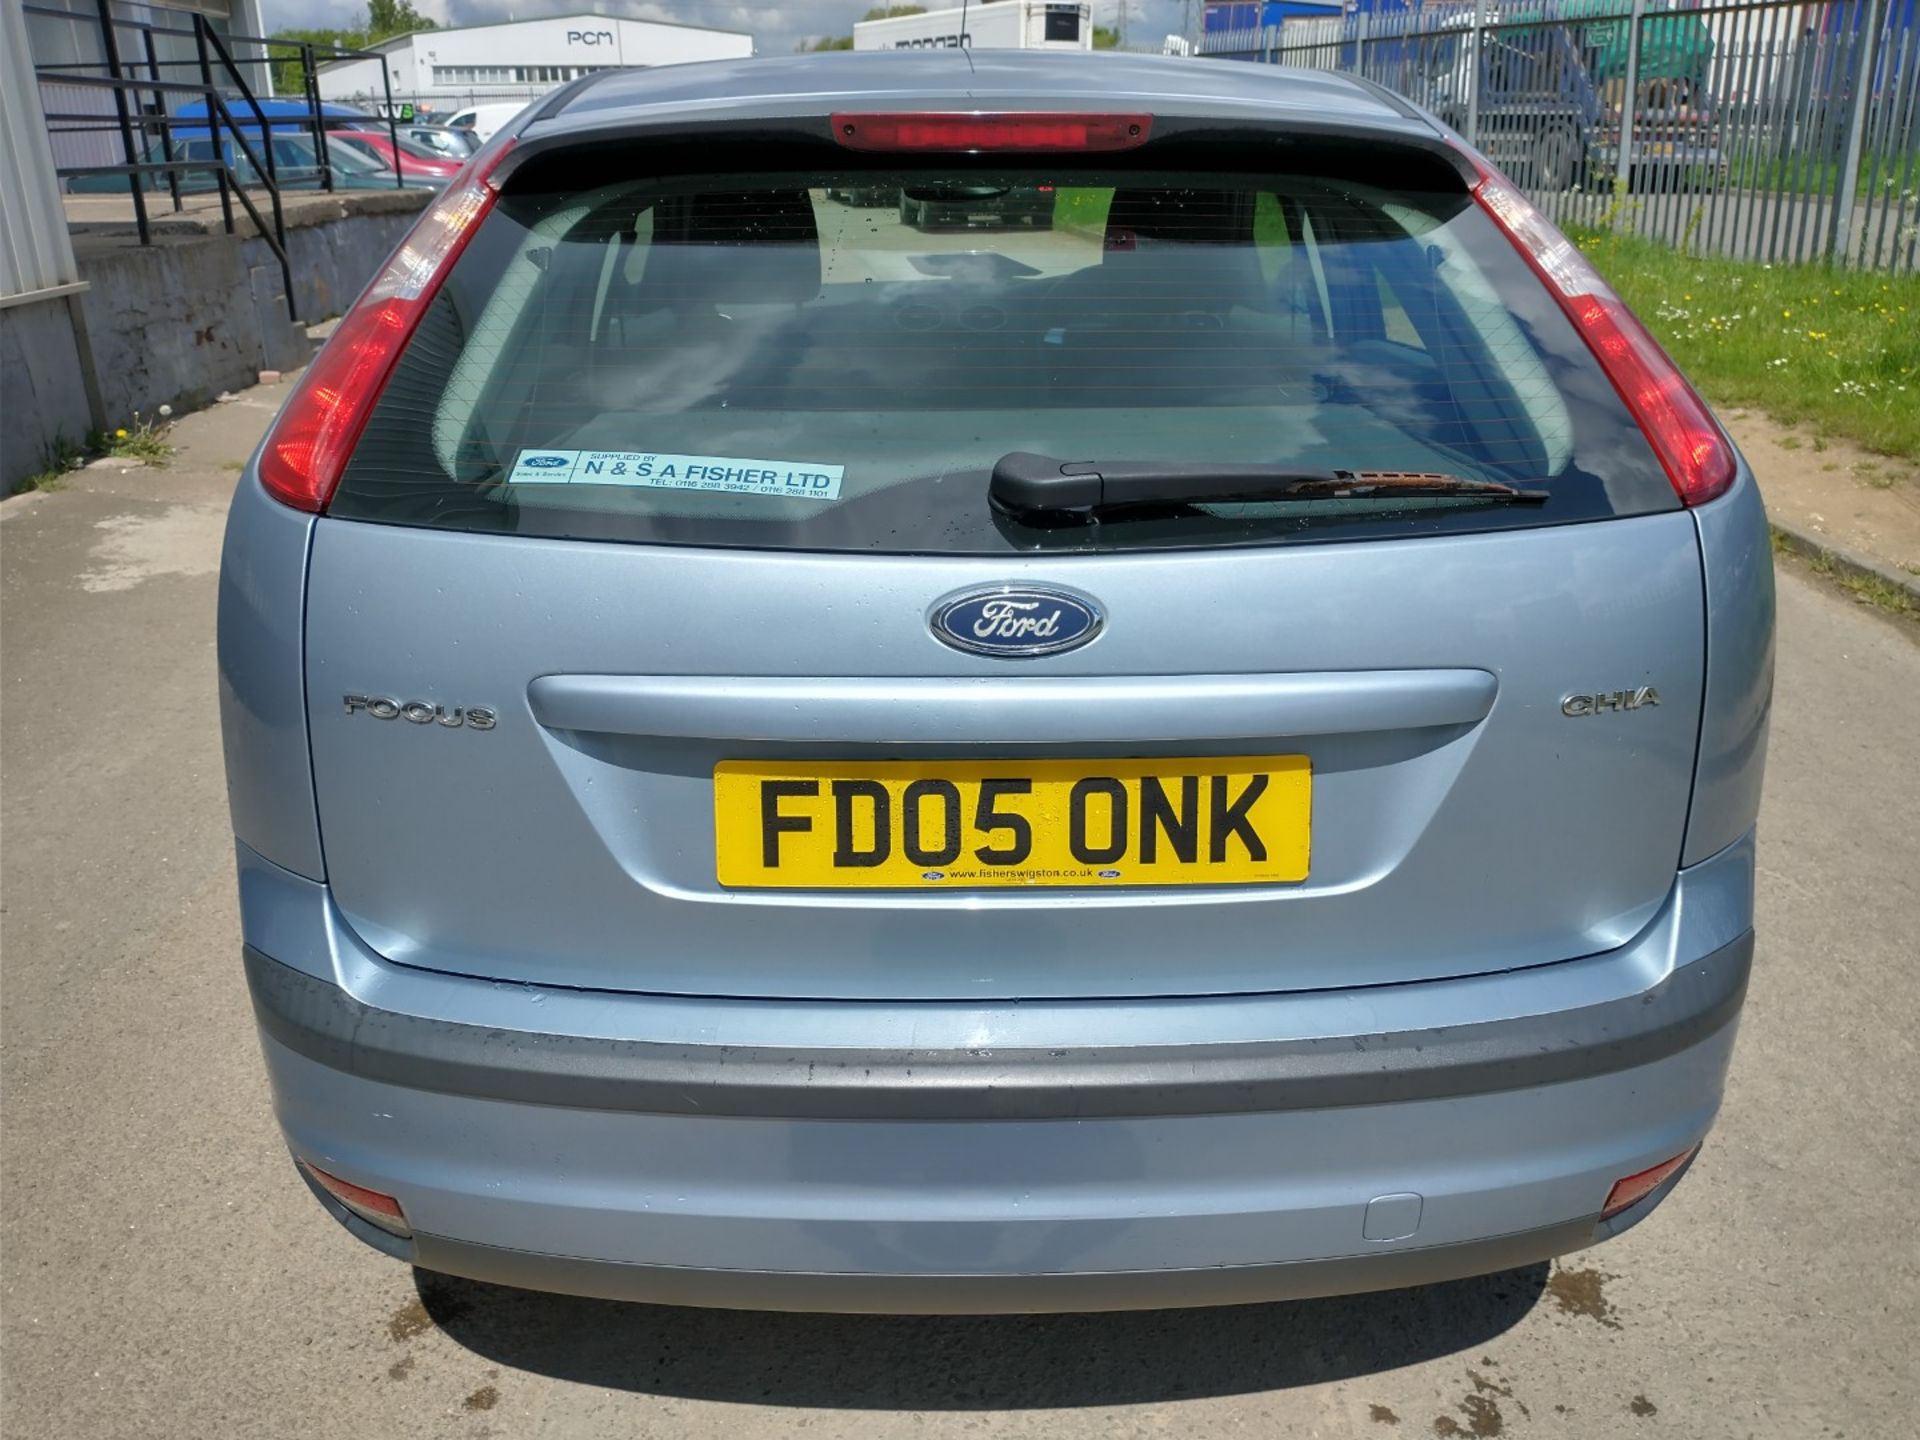 2005 Ford Focus Ghia T 5dr Hatchback - CL505 - NO VAT ON THE HAMMER - Location: Corby - Image 6 of 20